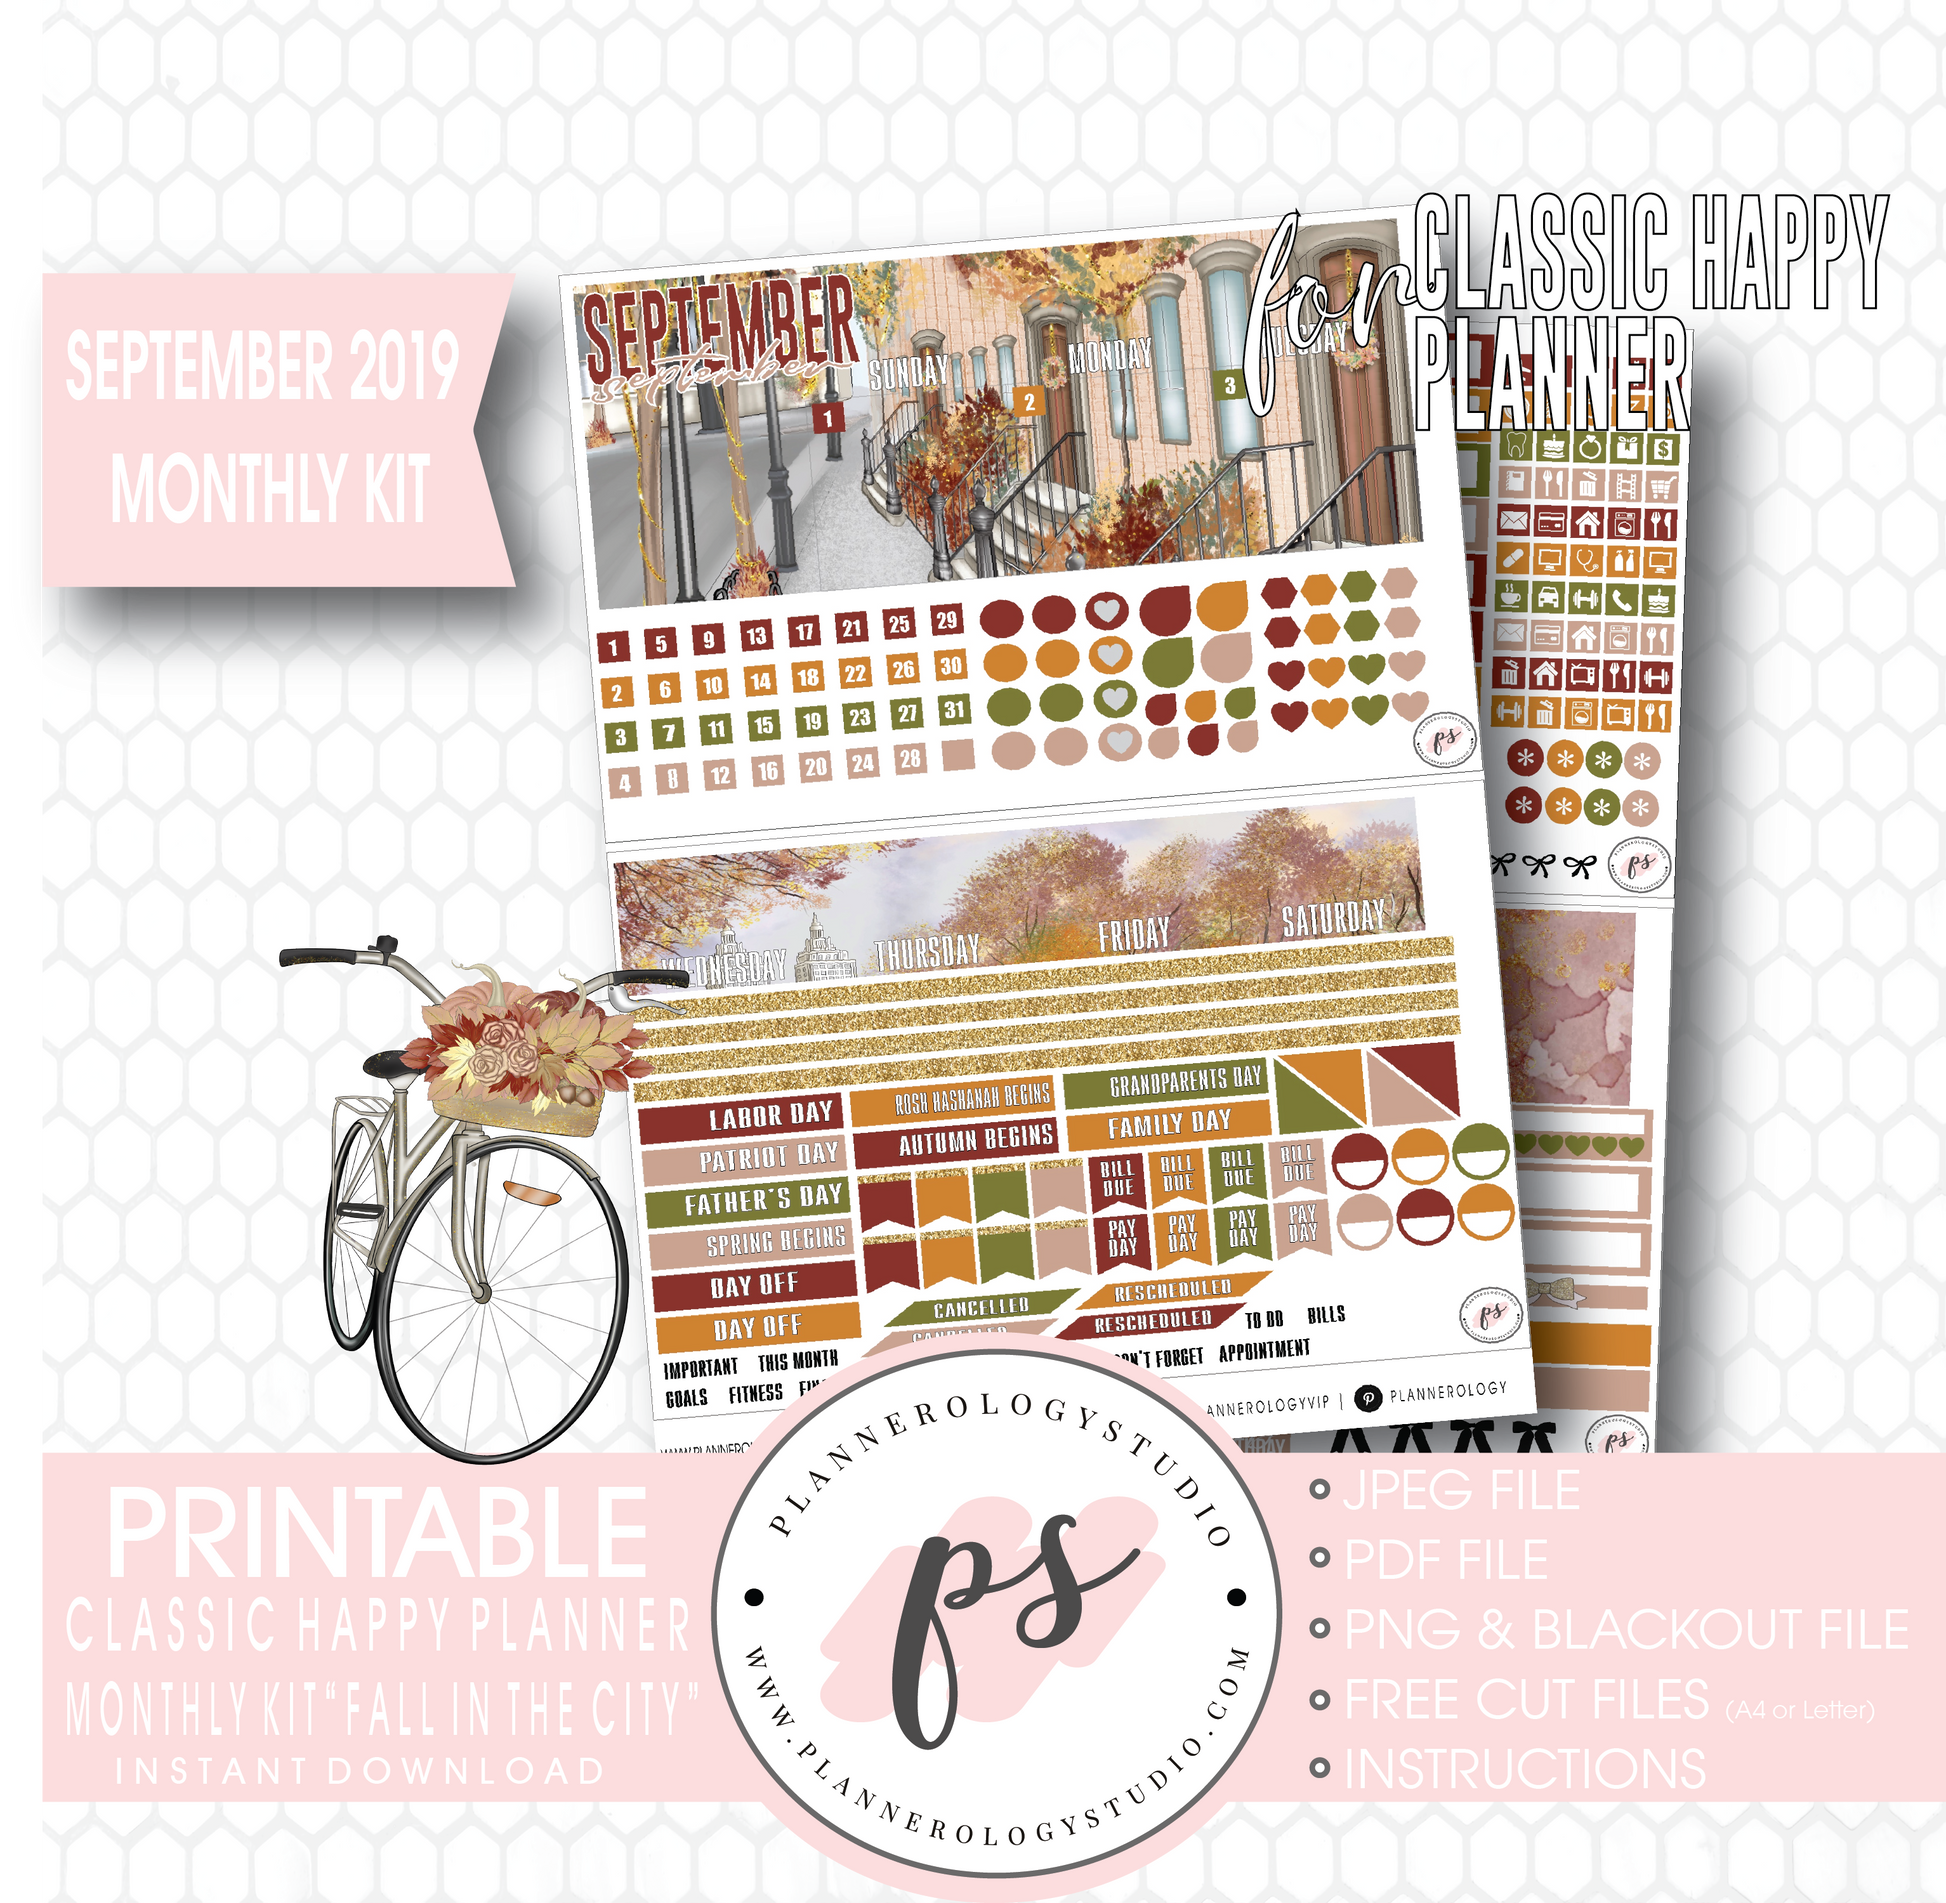 Fall in the City September 2019 Monthly View Kit Digital Printable Planner Stickers (for use with Classic Happy Planner) - Plannerologystudio